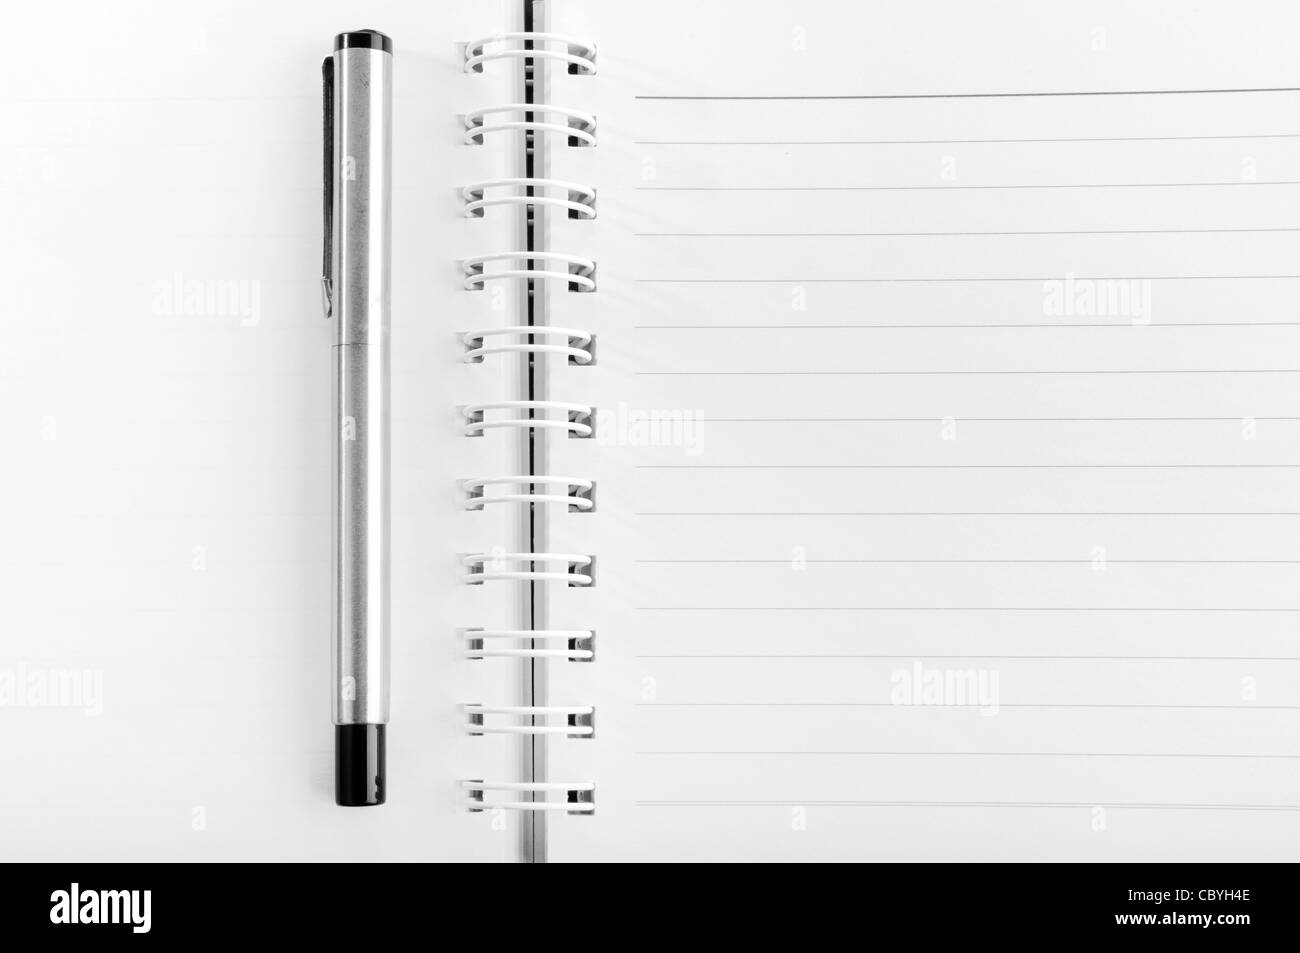 Blank notepad with a pen Stock Photo